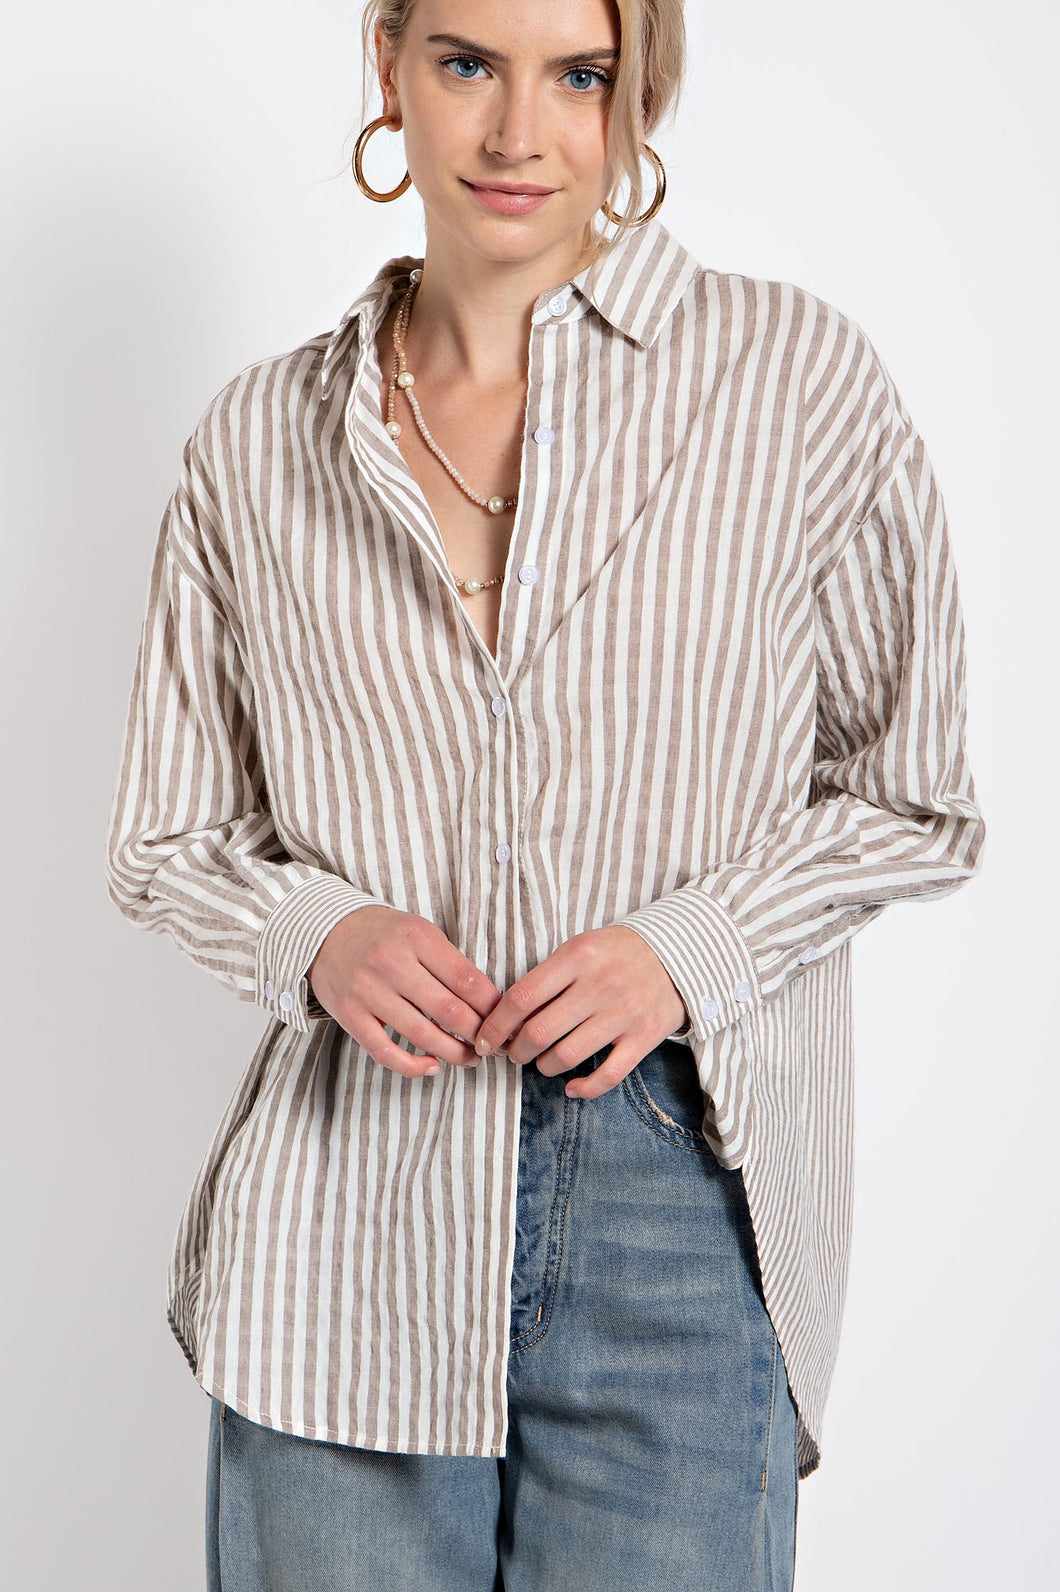 Easel Mixed Stripes Button Down Oversized Shirt in Mushroom Shirts & Tops Easel   